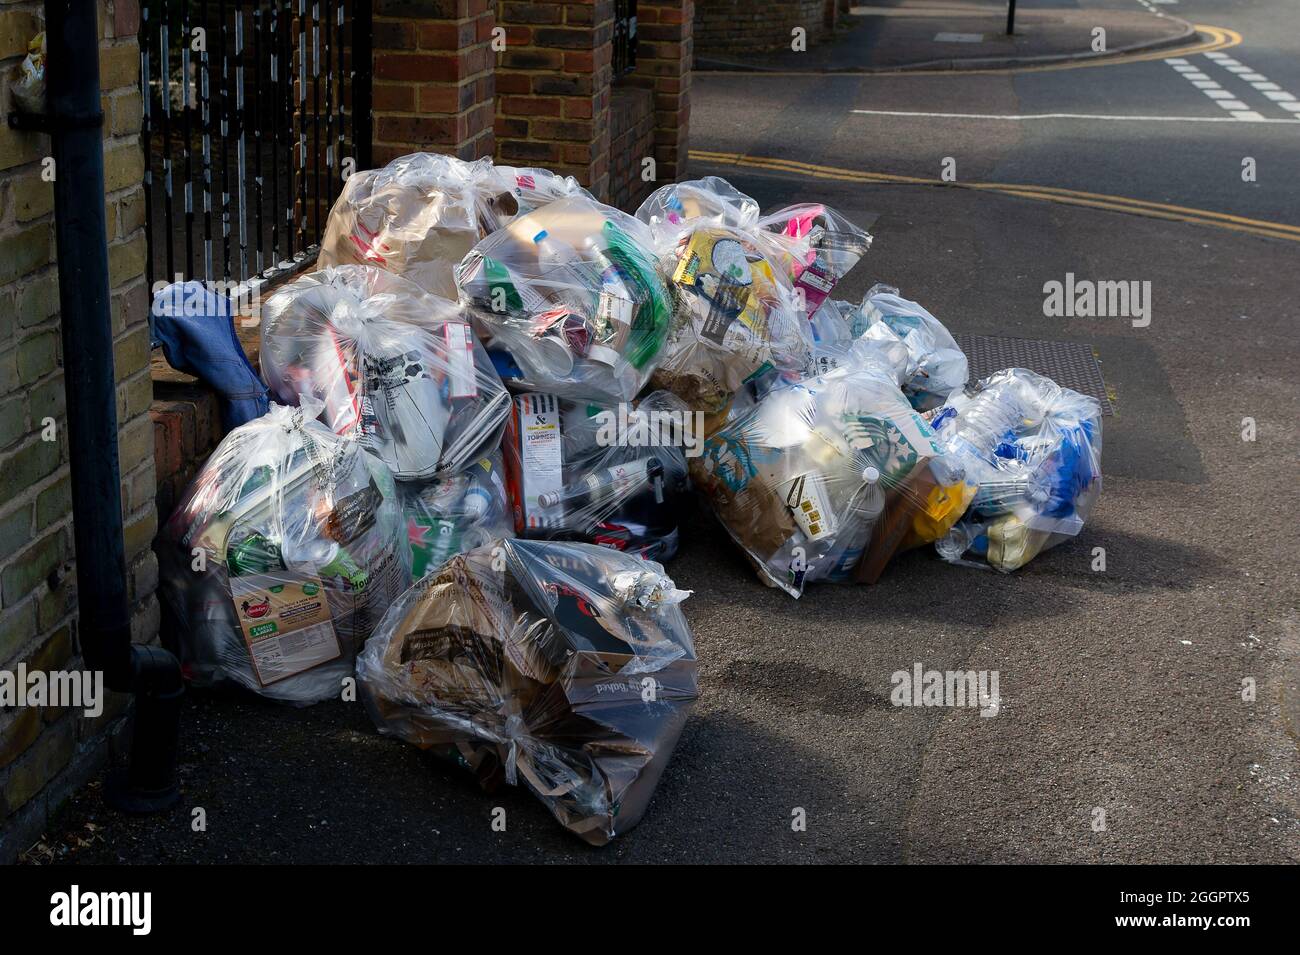 Uxbridge, London Borough of Hillingdon, UK. 2nd September, 2021. Rubbish in plastic bags awaiting collection in Uxbridge. Some Councils are still delaying household refuse collection due to Covid-19 self isolation staff absences. Credit: Maureen McLean/Alamy Stock Photo